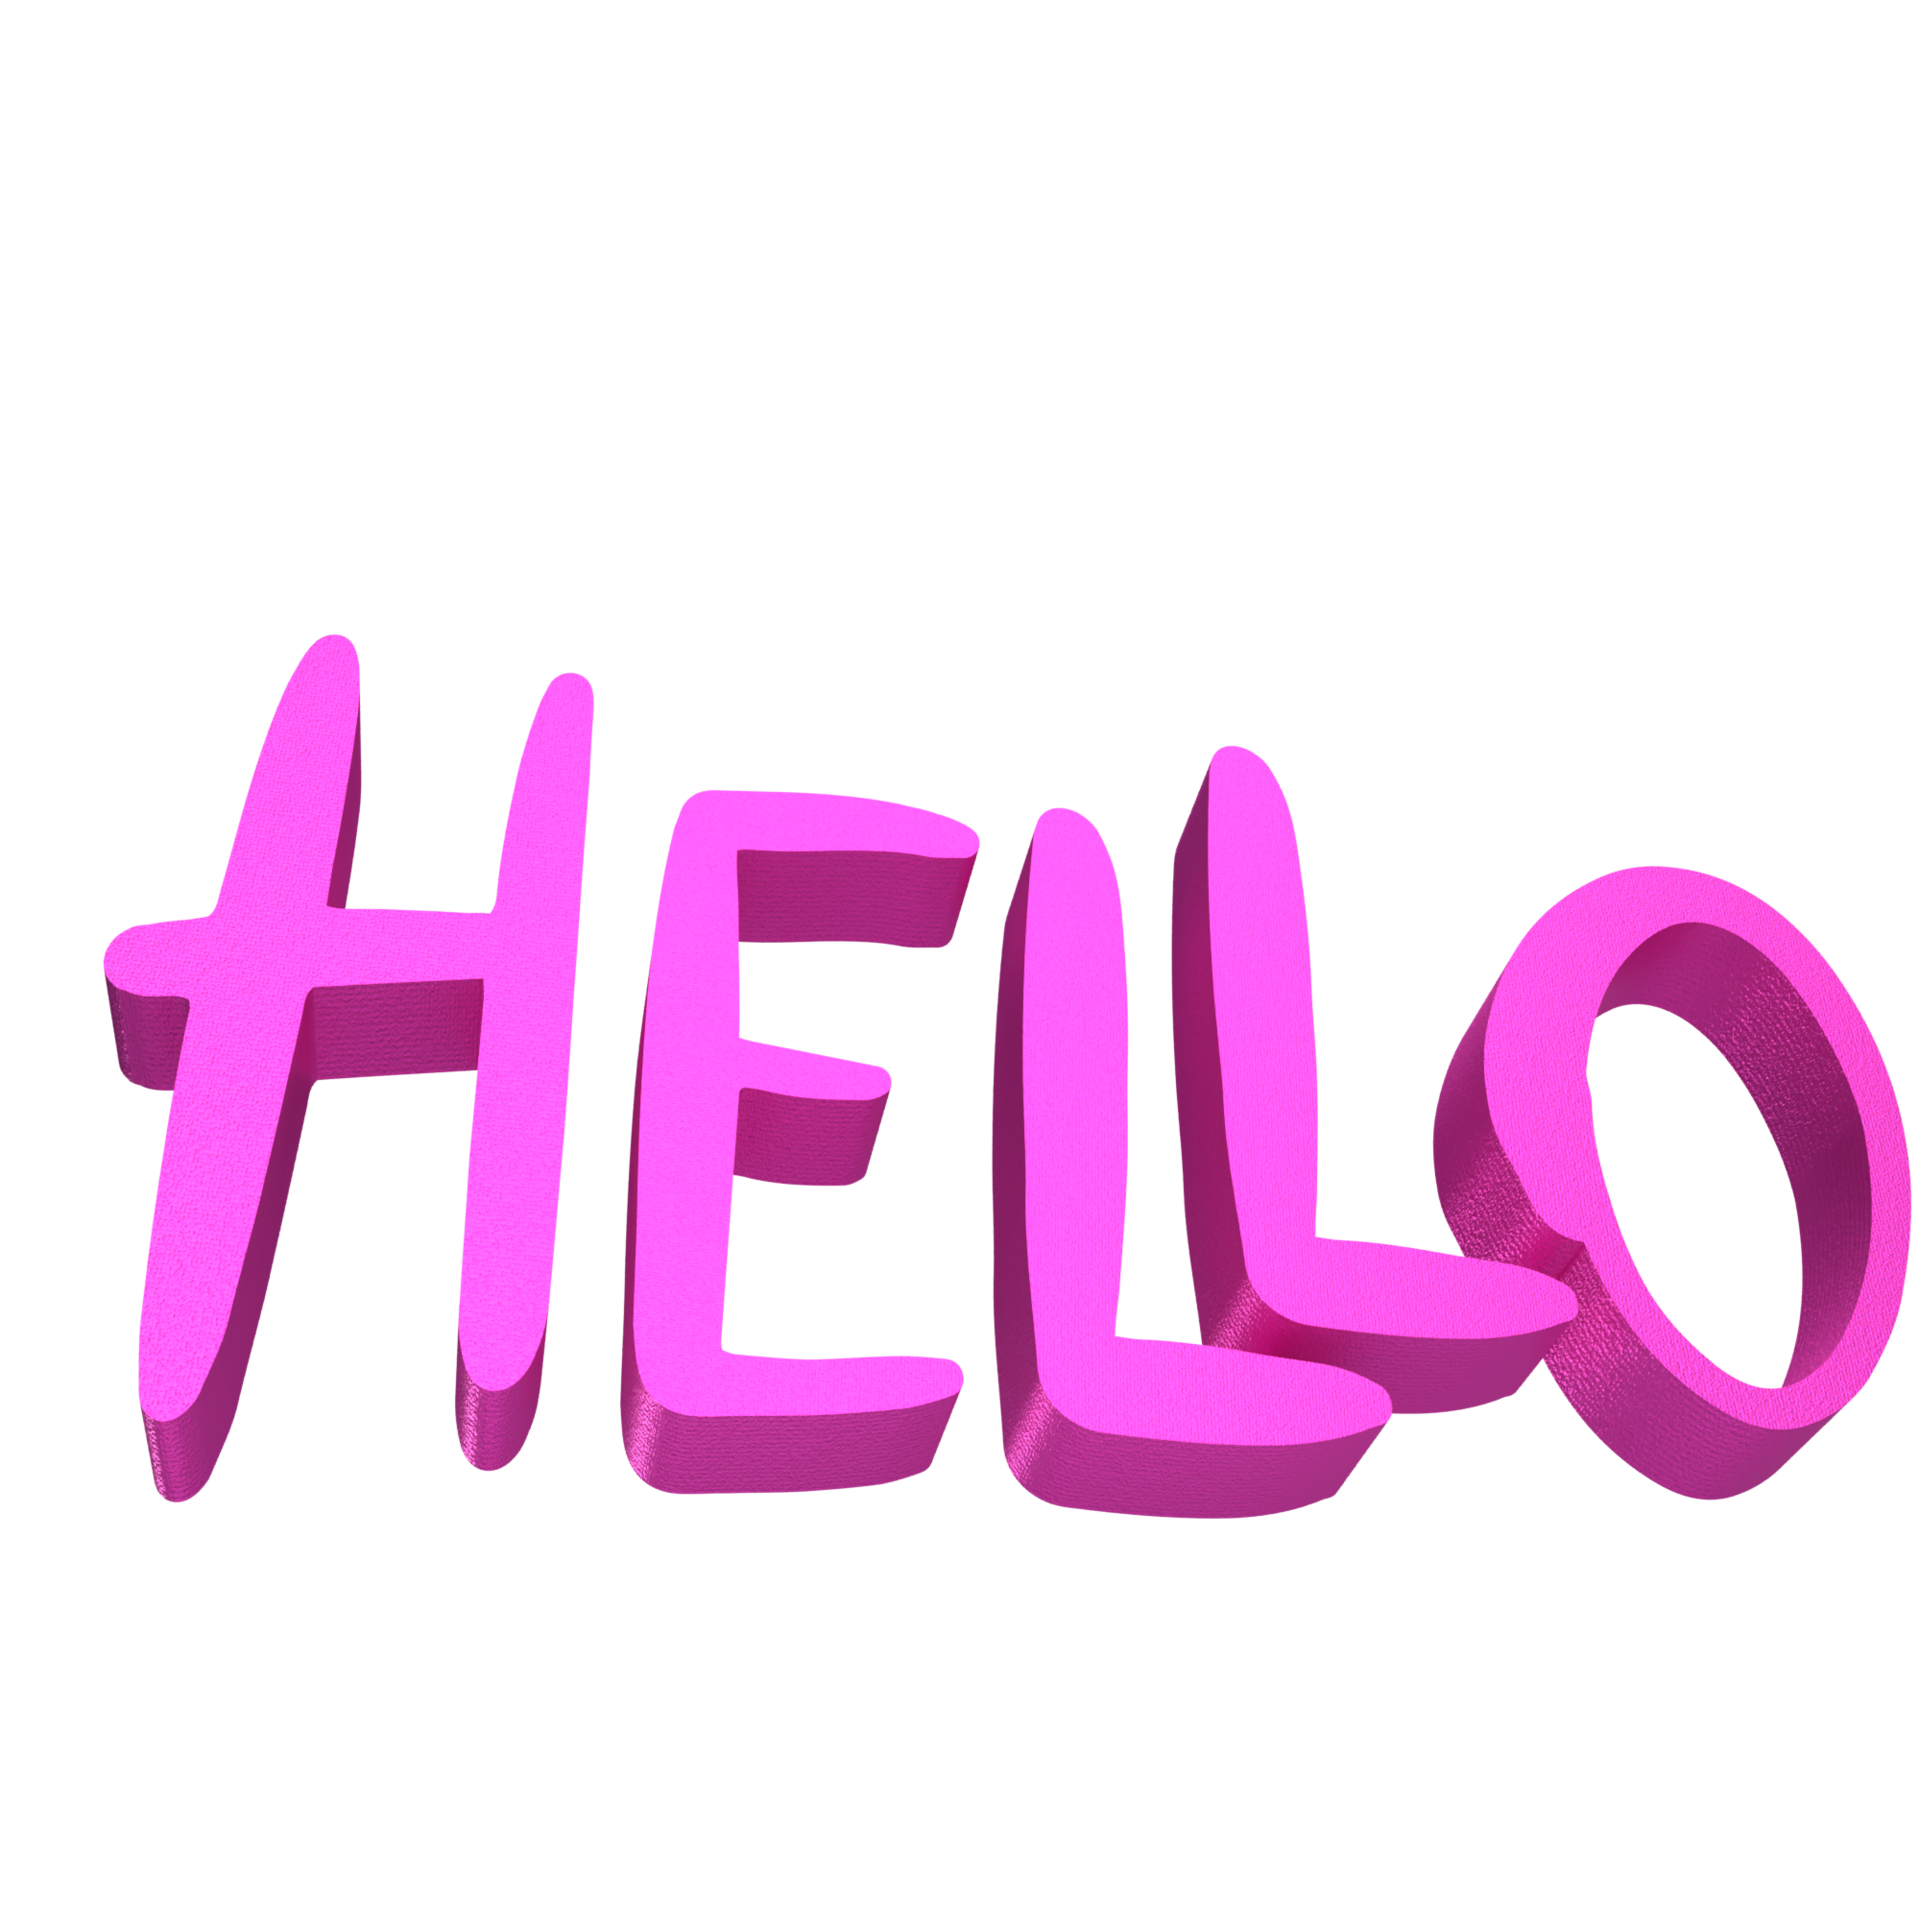 The pink text hello png image 15268926 PNG